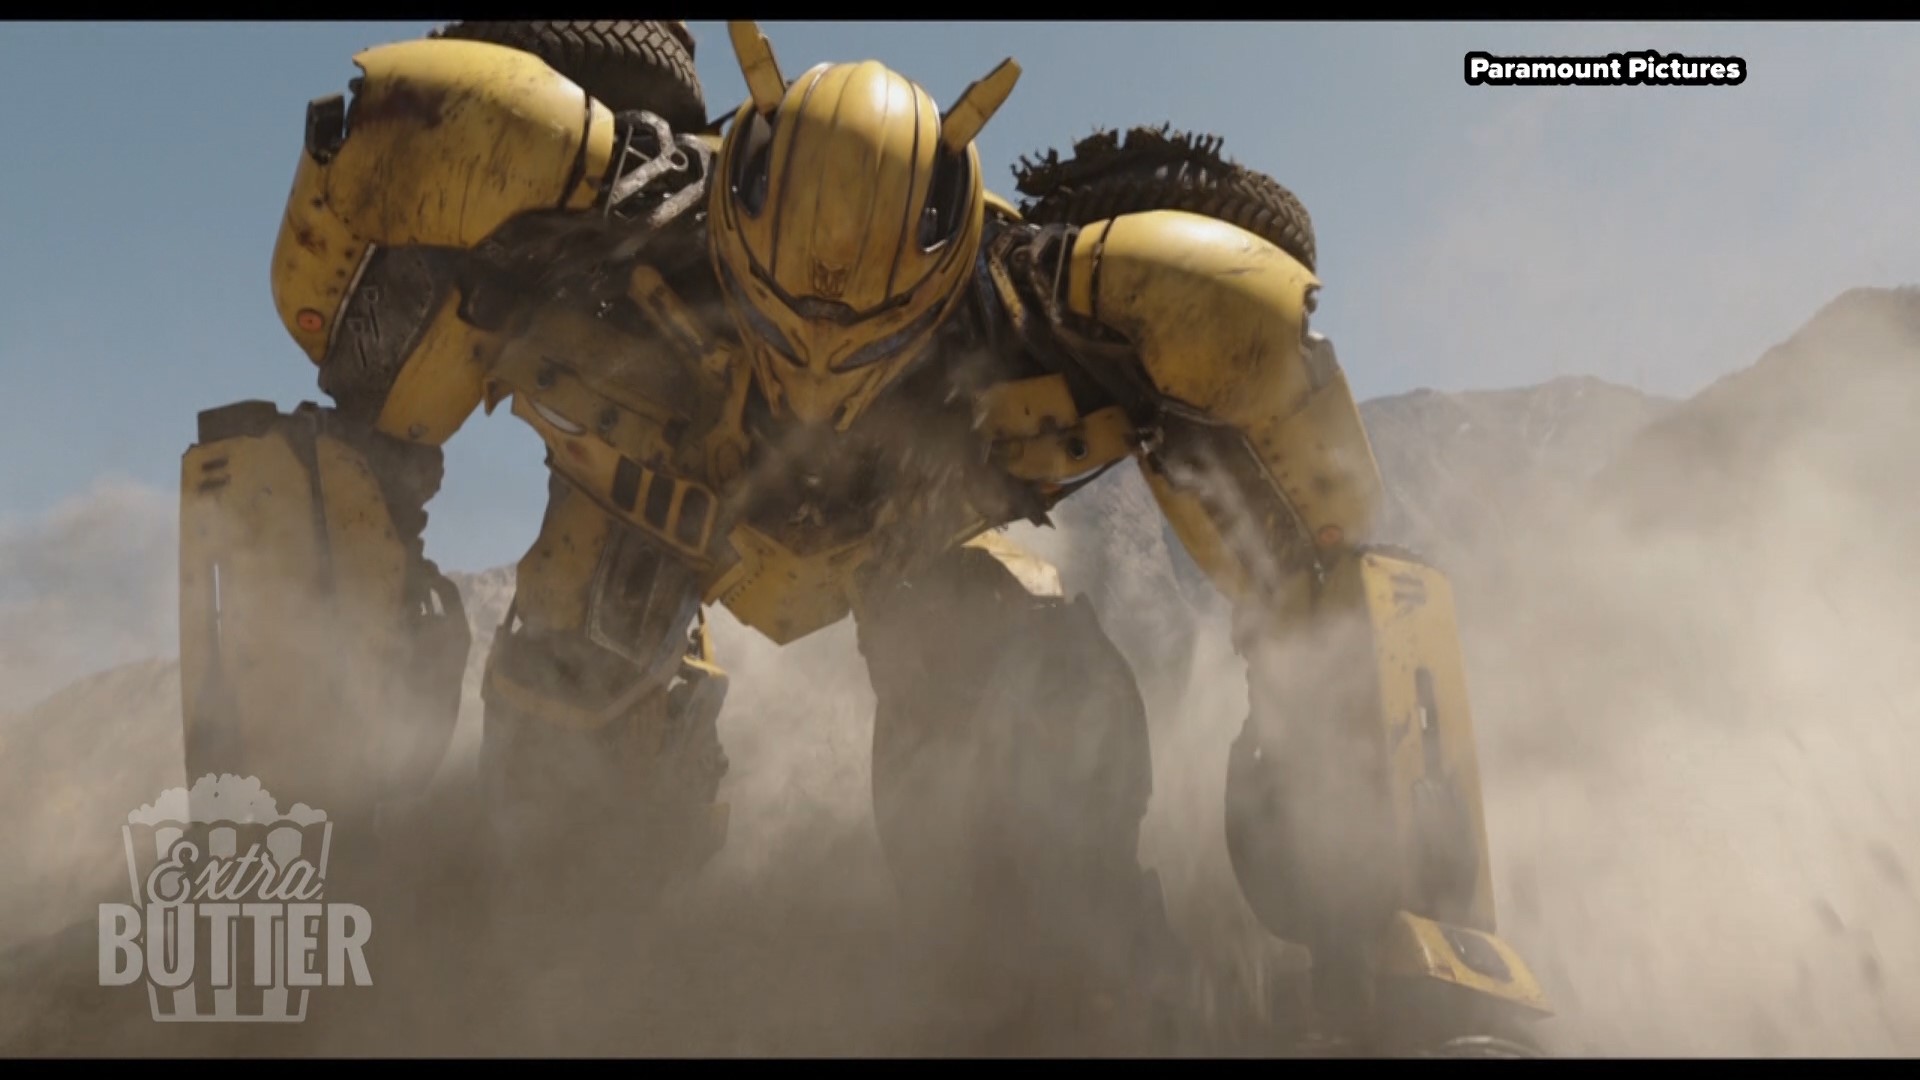 If you haven't seen 'Bumblebee,' now is the time to watch it at home on Blu-Ray or digital. The latest movie in the Transformers franchise might be the best. The movie is a prequel to other films in the series. John Cena tells Mark S. Allen about growing up in the 80s, including his favorite cereal, cartoons, and the posters he had up in his bedroom. Interview arranged by Paramount Pictures.